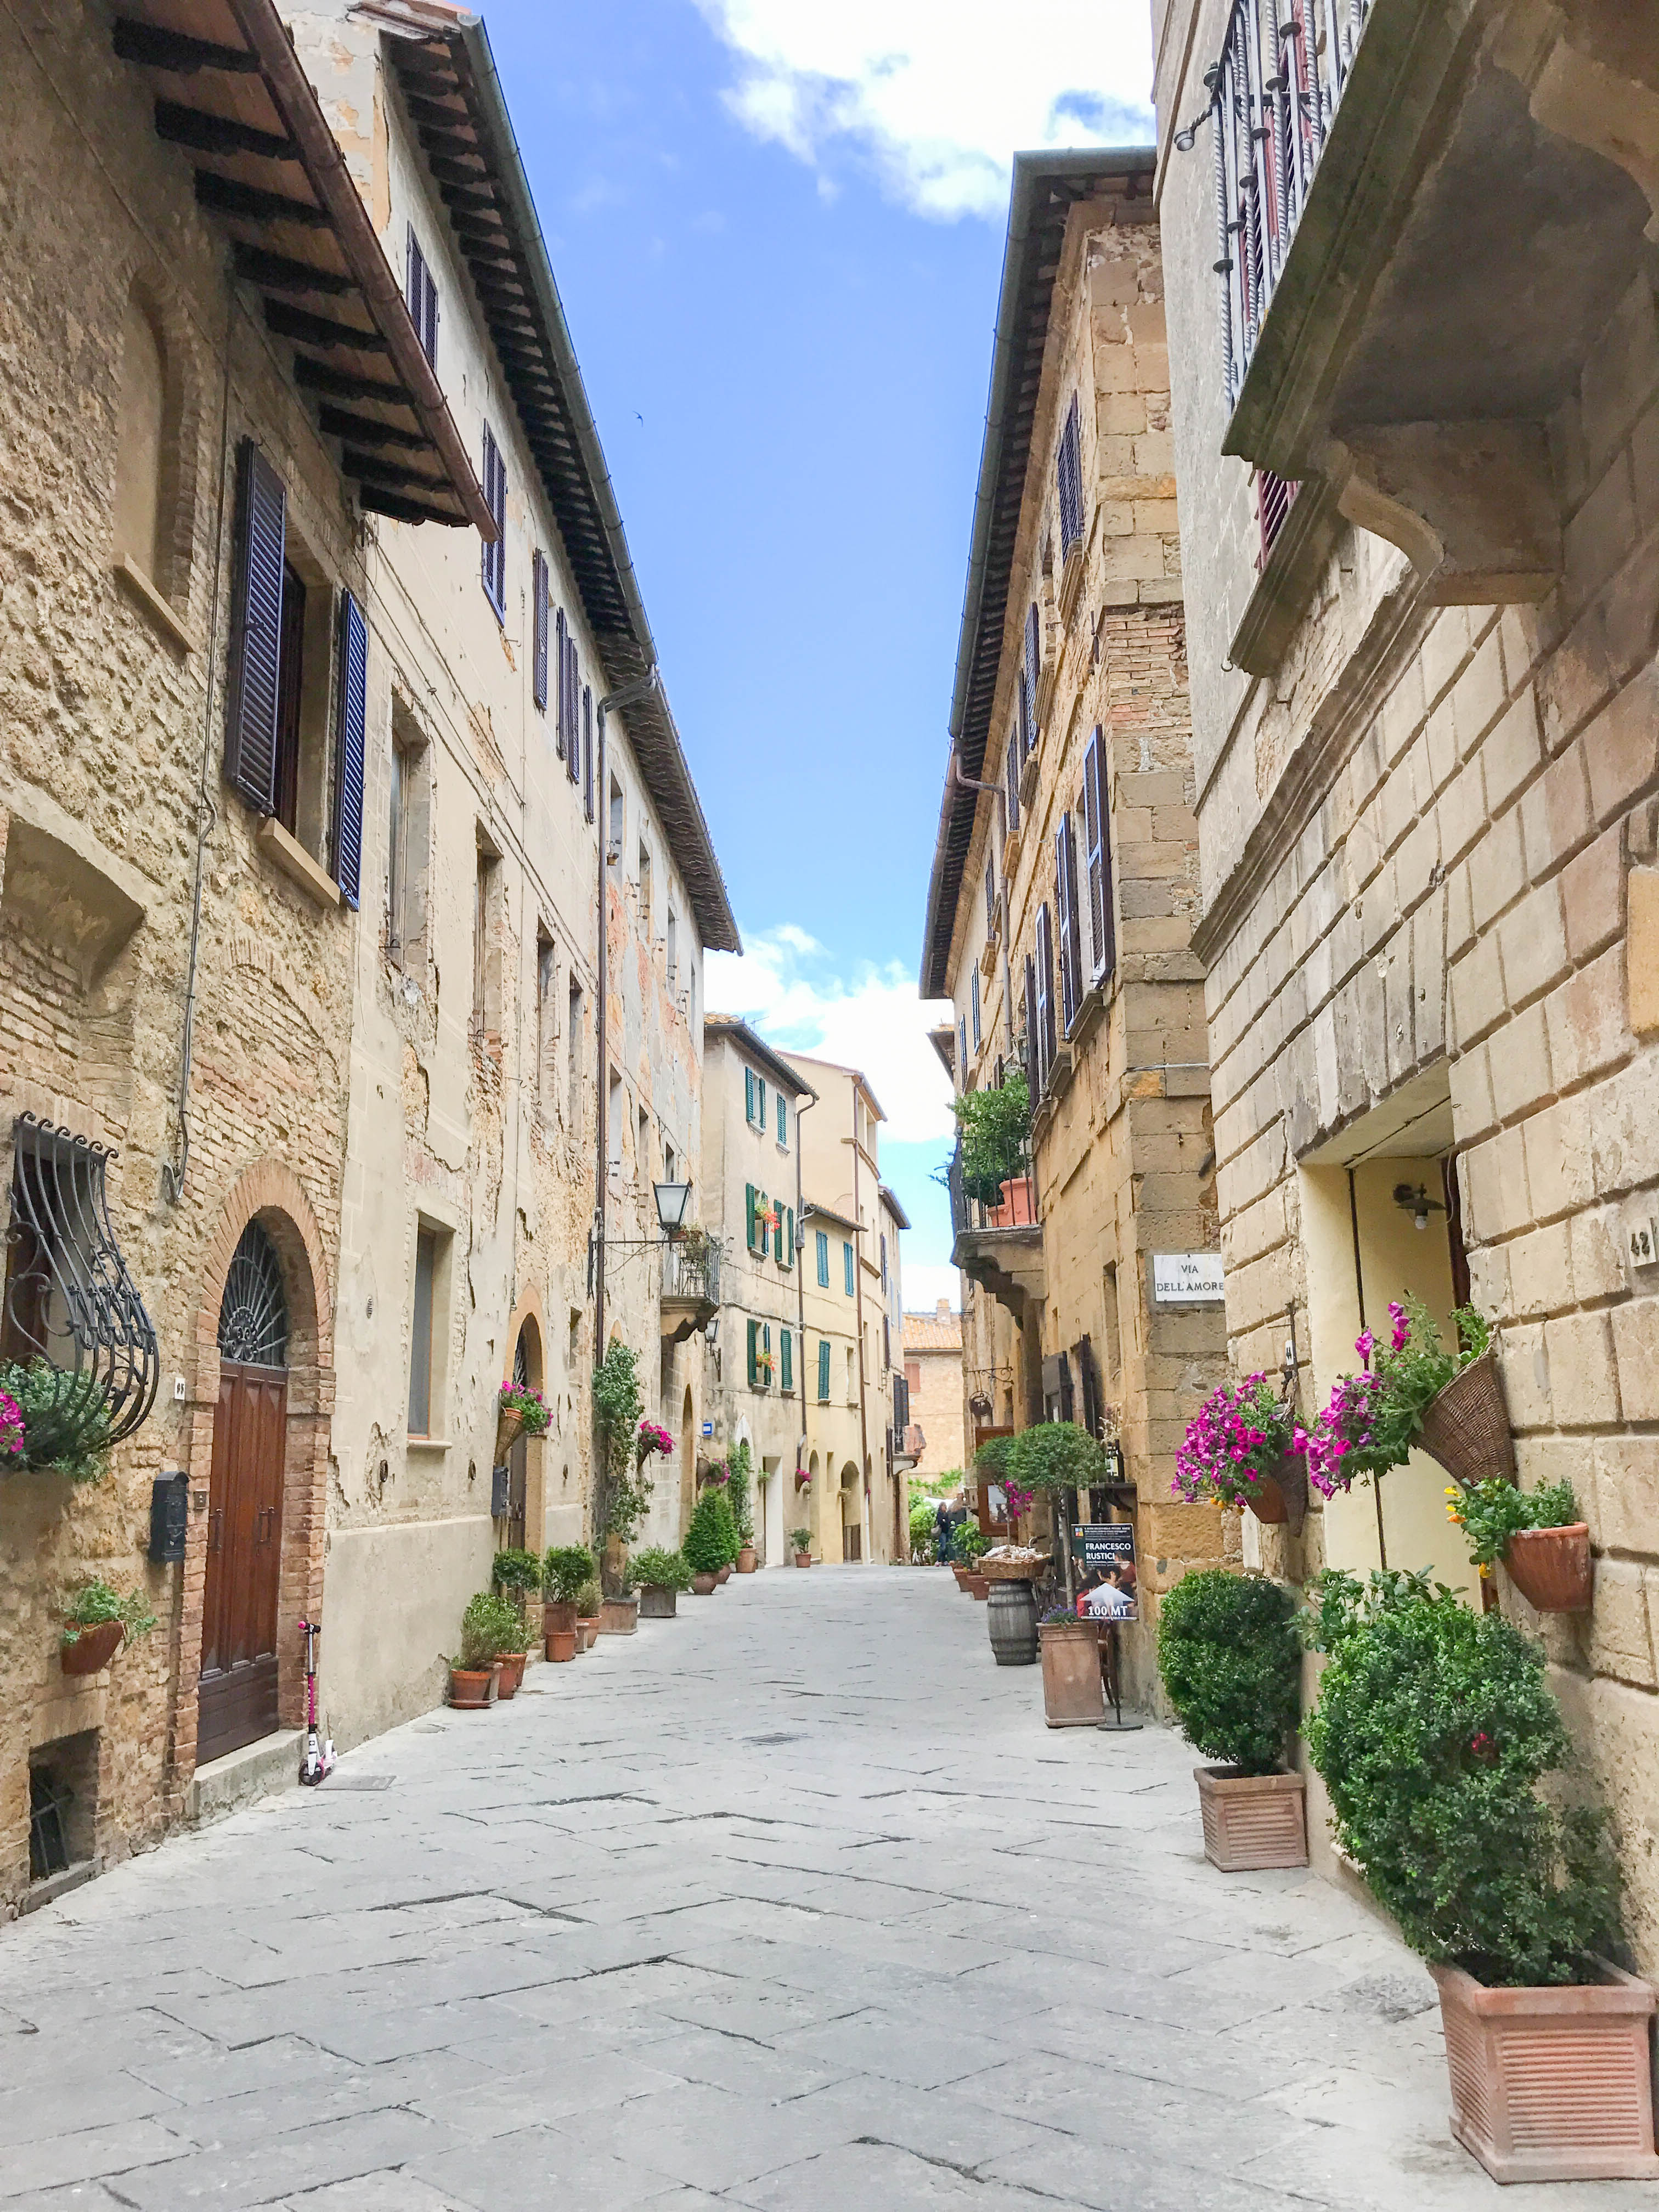 Pienza, Italy: One of the Most Charming Towns in Tuscany